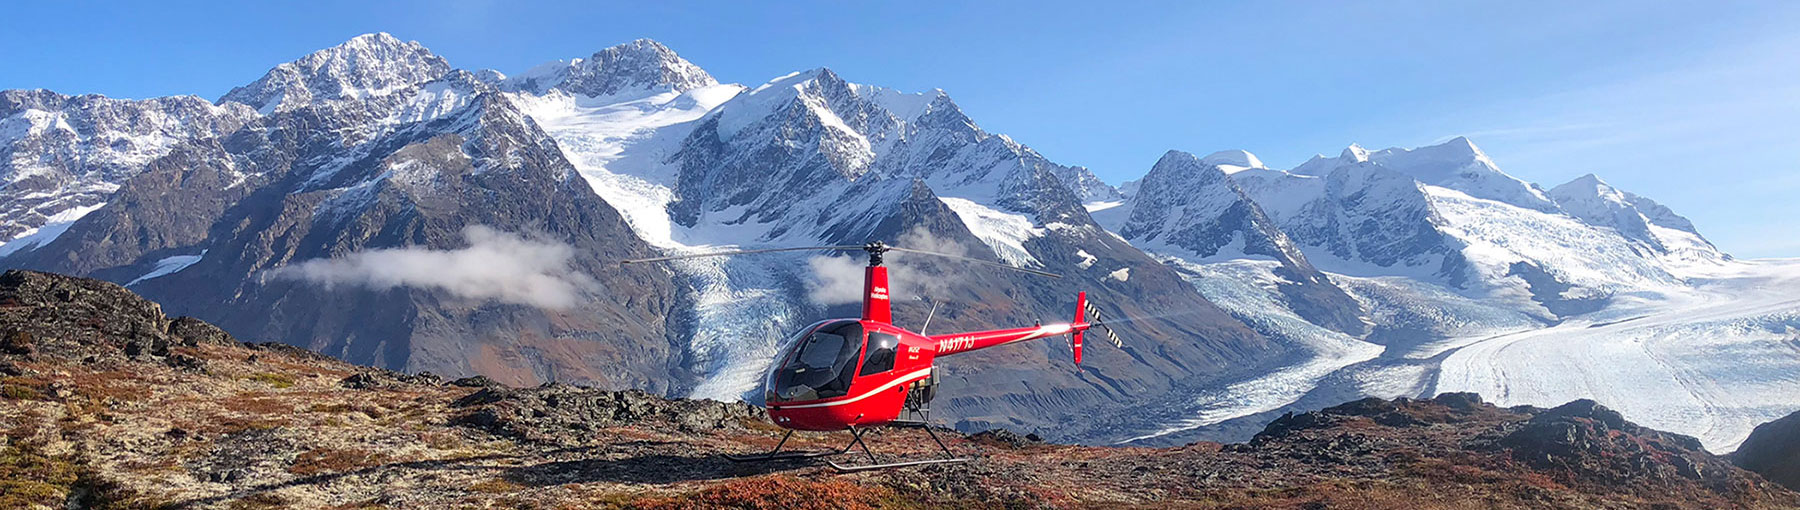 Helicopter landed in front of majestic, Alaskan mountain.